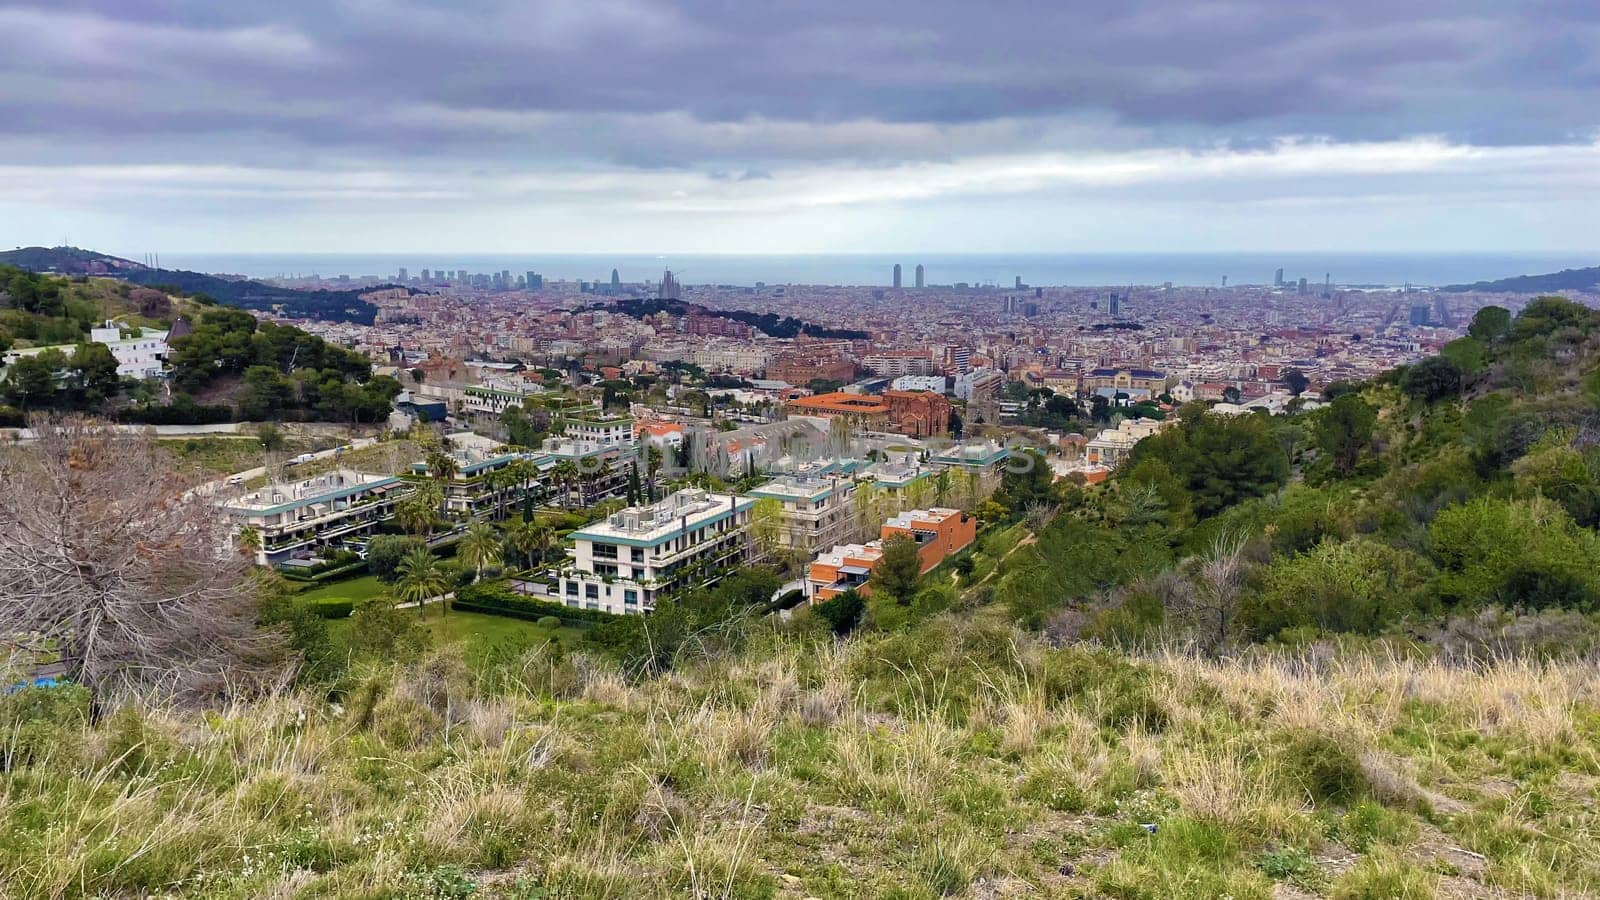 View of the Barcelona city from the hill, gloomy weather landscape. High quality photo